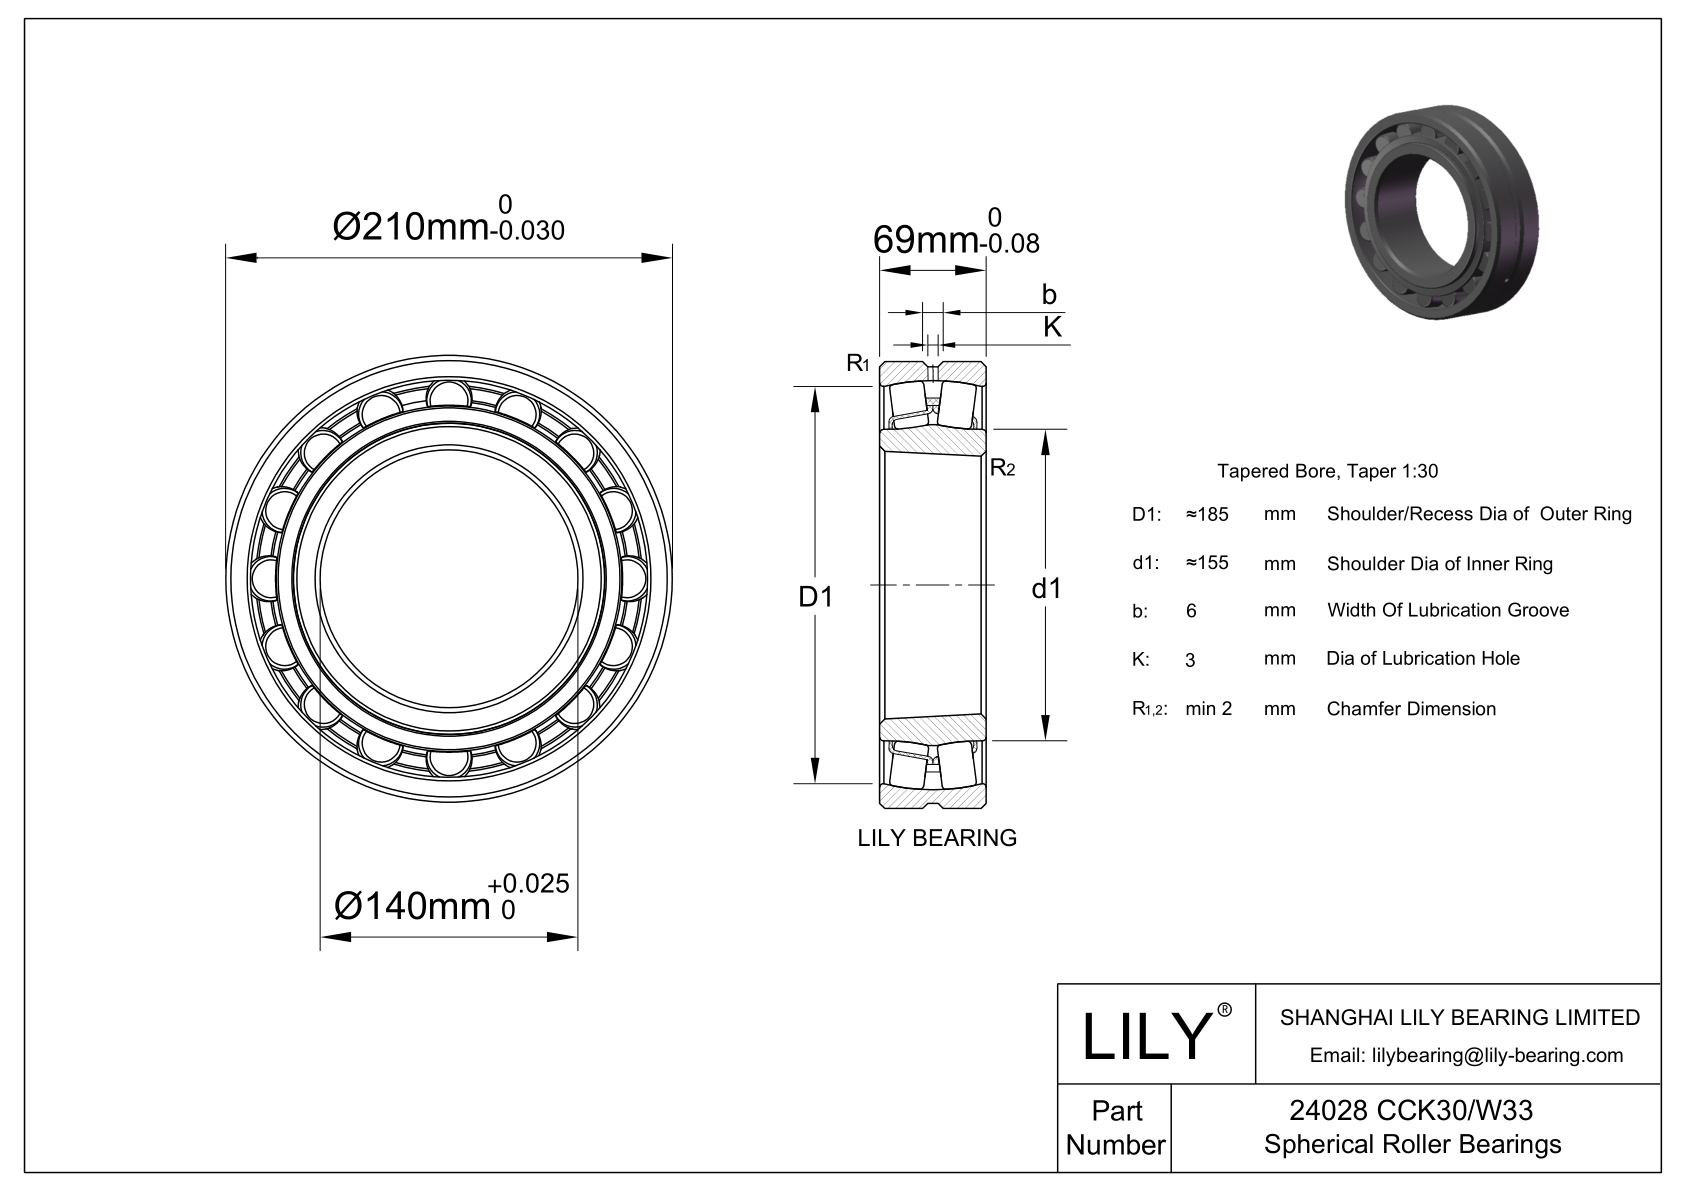 24028 CCK30/W33 Double Row Spherical Roller Bearing cad drawing